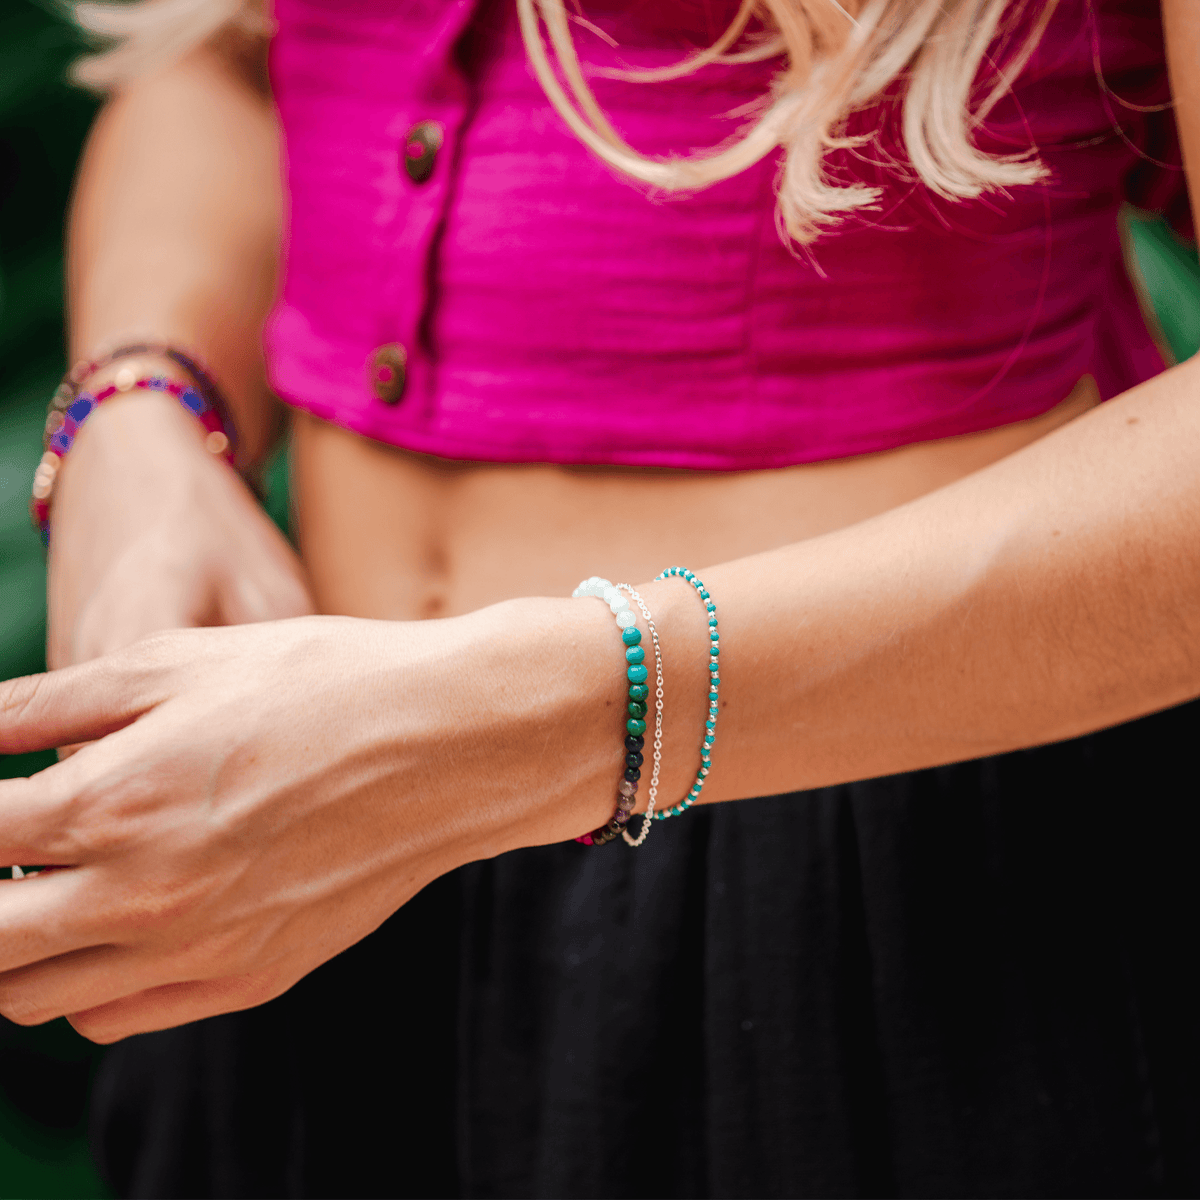 Model wearing a stack of three bracelets. The bracelets include a 4mm multicolor stone healing bracelet, a dainty silver chain bracelet and a 2mm turquoise stone and gold bead healing bracelet